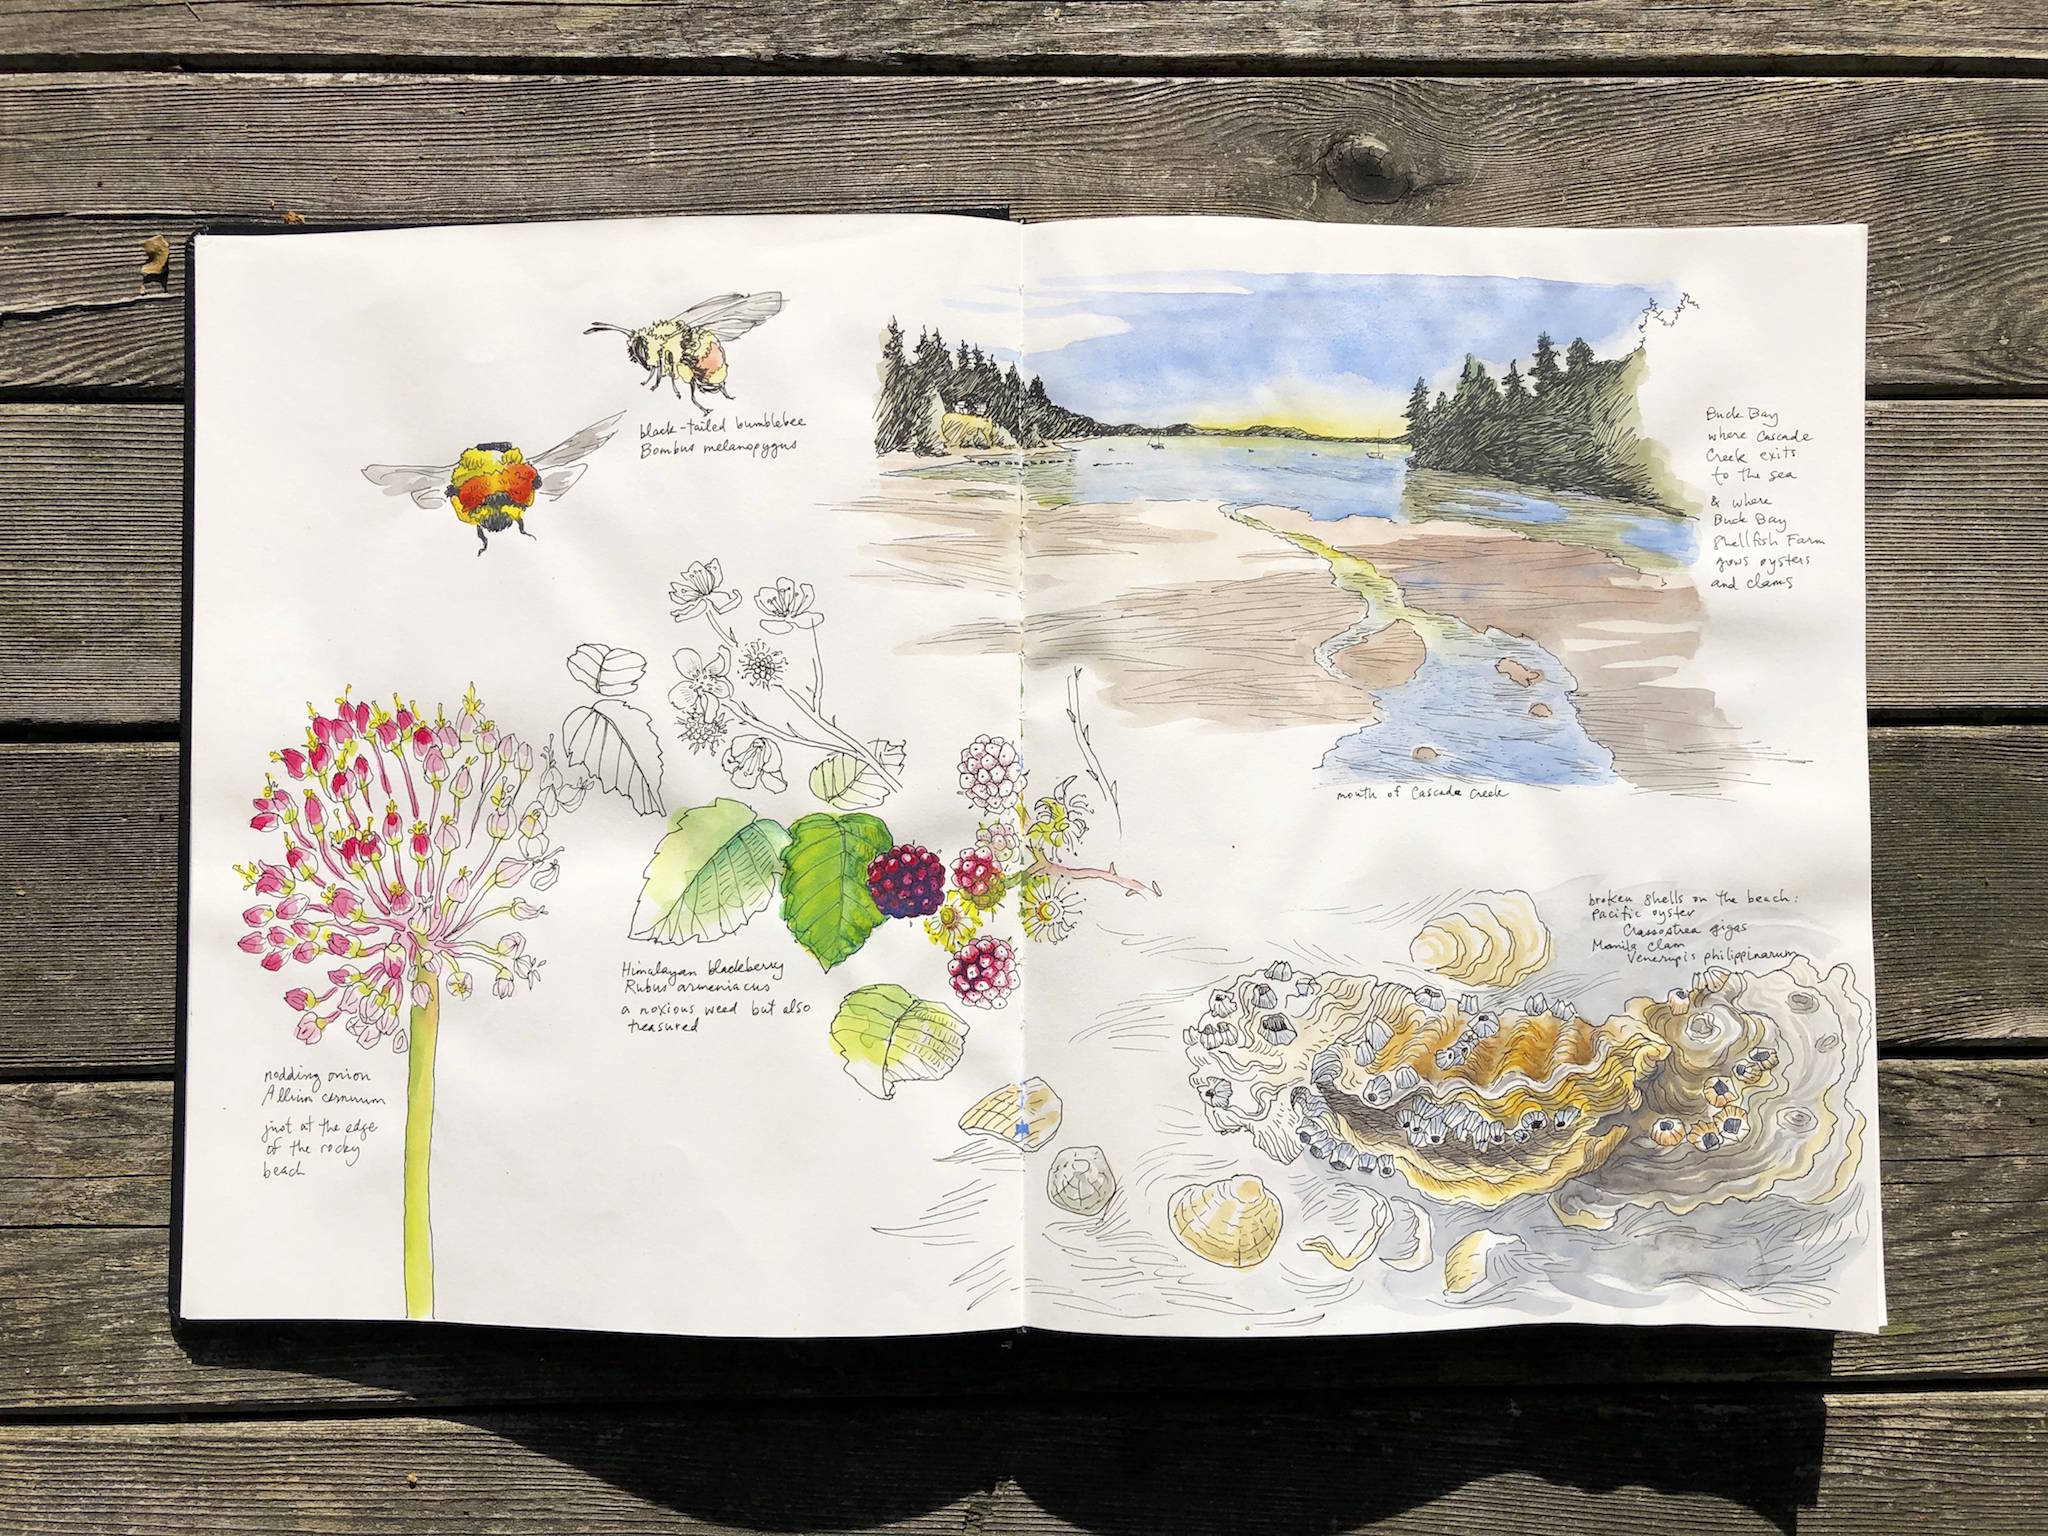 Contributed photo of sketches by Robin Lee Carlson | Artist and biologist Robin Lee Carlson hiked Cascade Creek from Mountain Lake to the San Juan County Land Bank’s Coho Preserve to sketch these images.